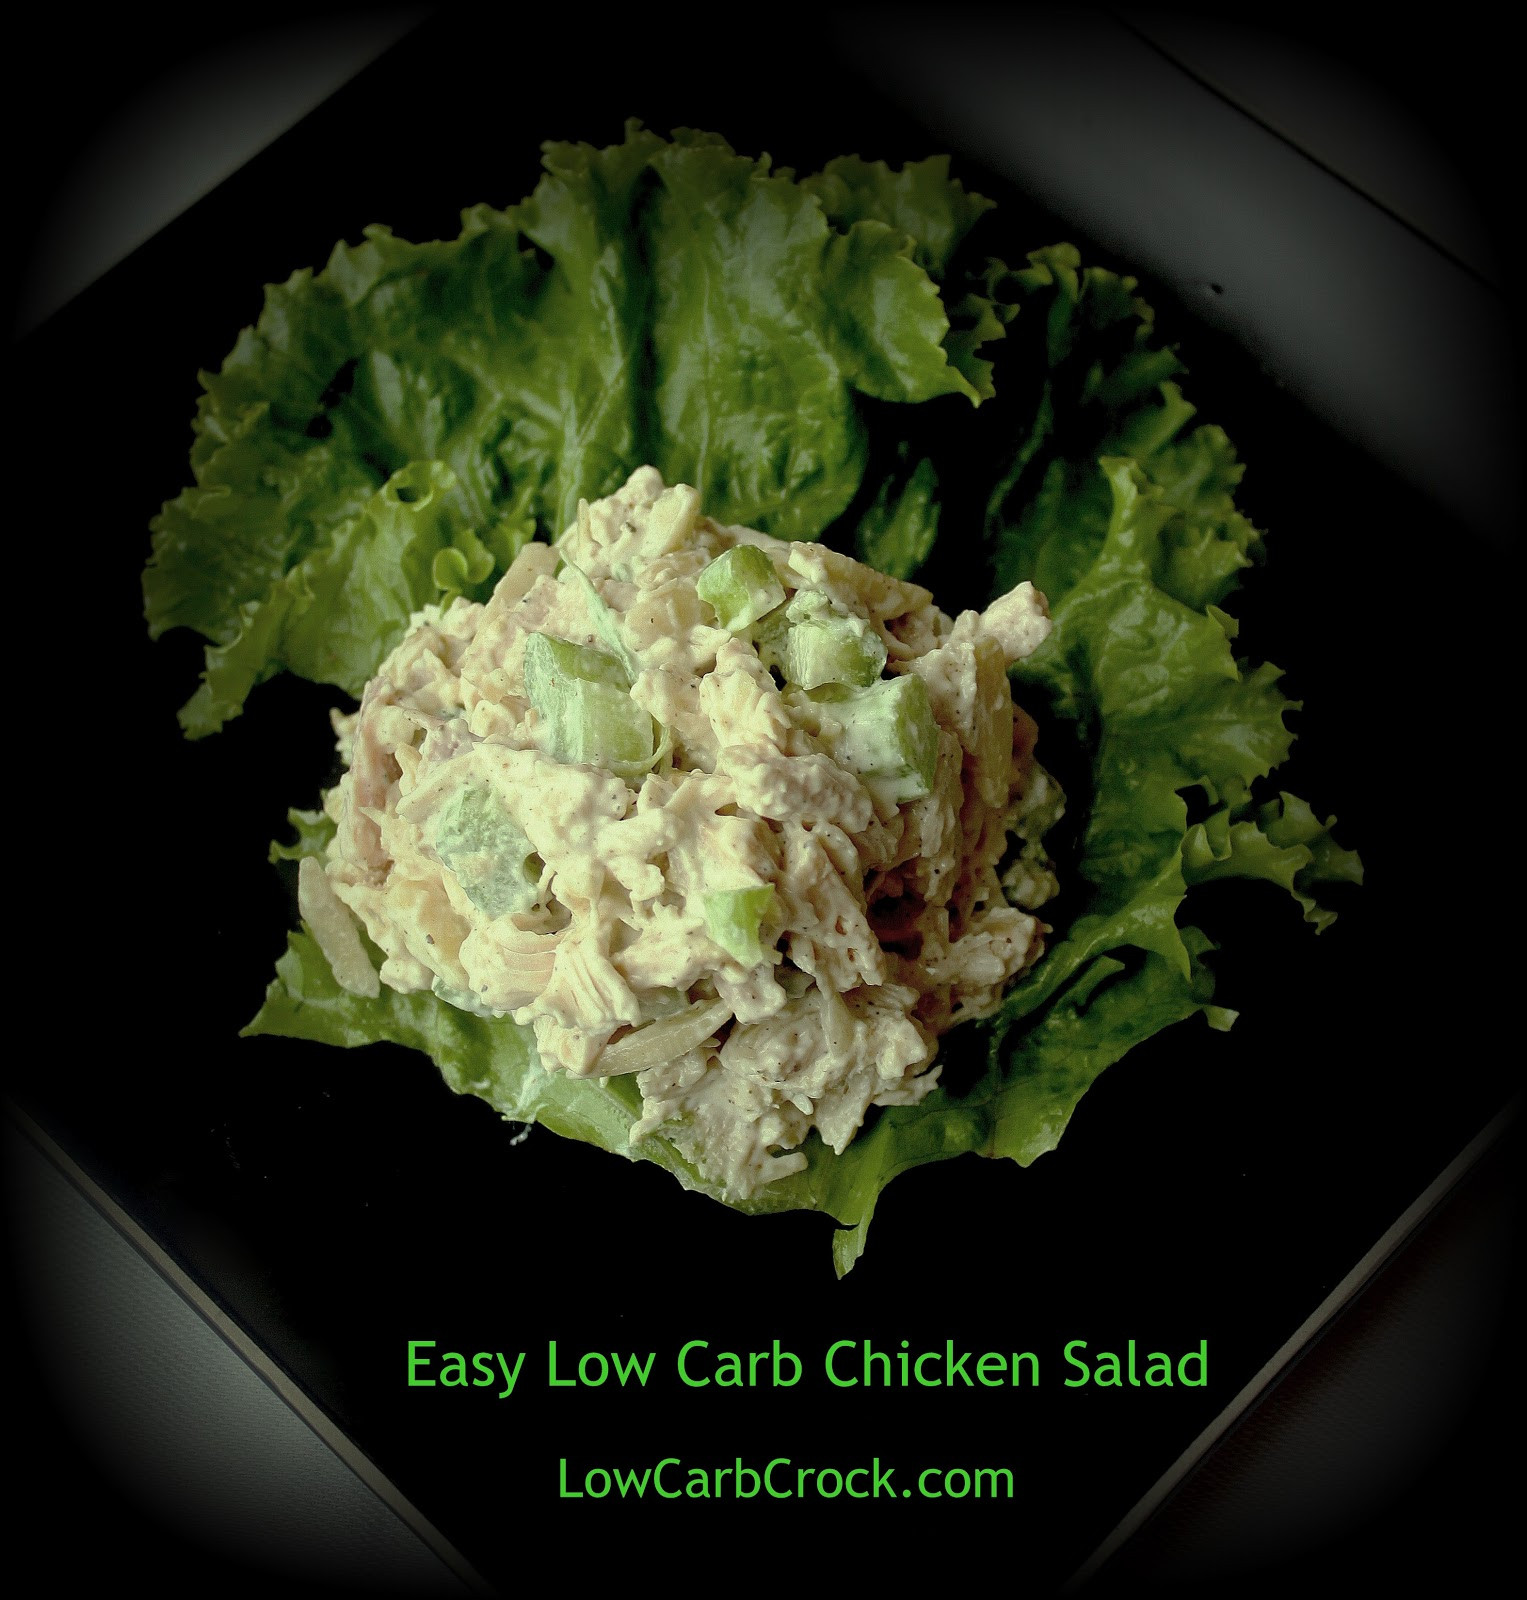 Low Carb Chicken Salad
 Easy Low Carb Almond Chicken Salad